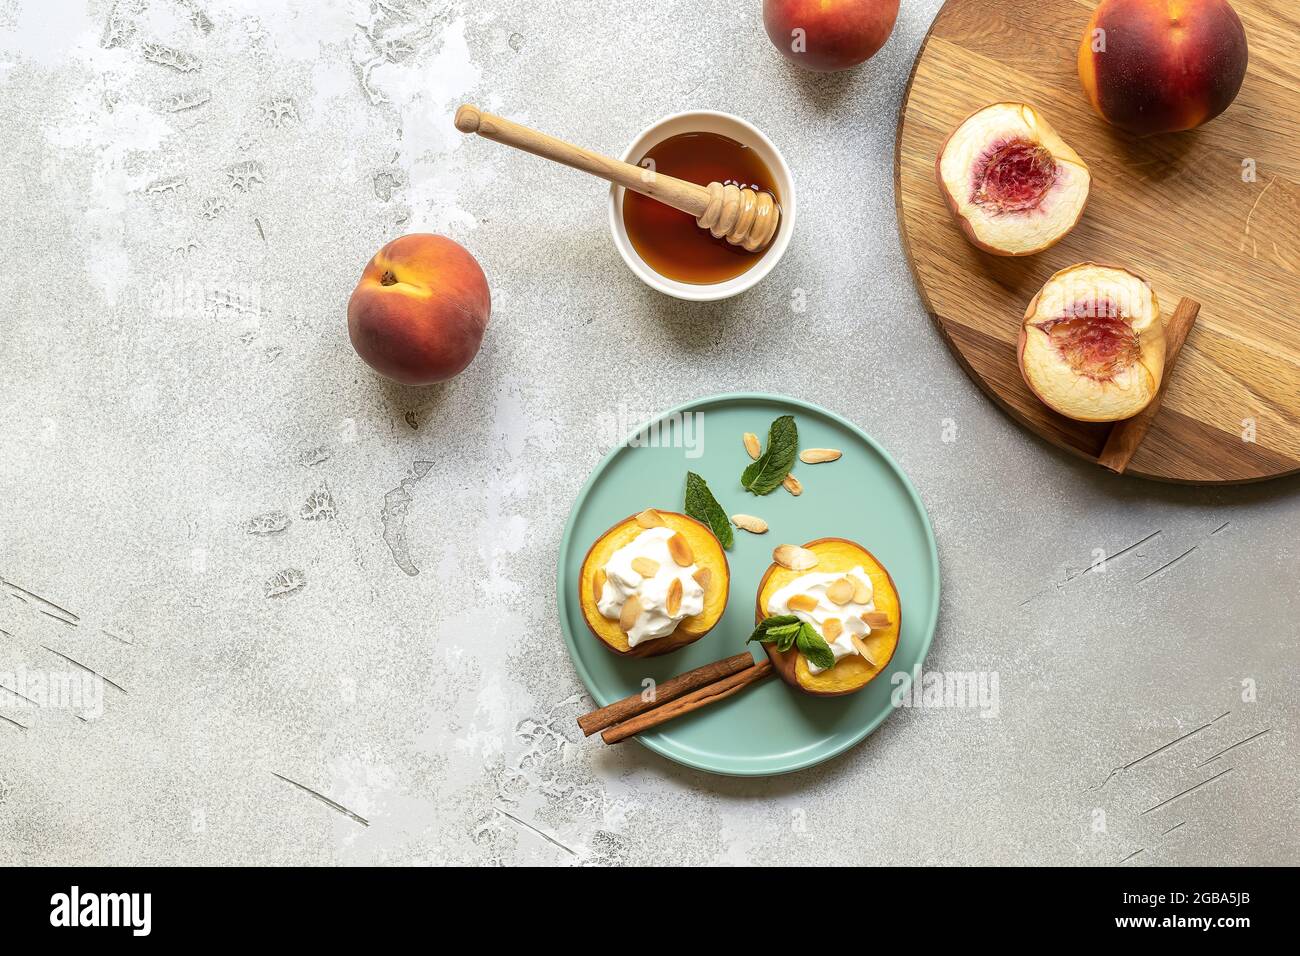 Baked peaches on a plate with mint leaf, cinnamon, non-dairy cream cheese, honey, and almond flakes. Stock Photo